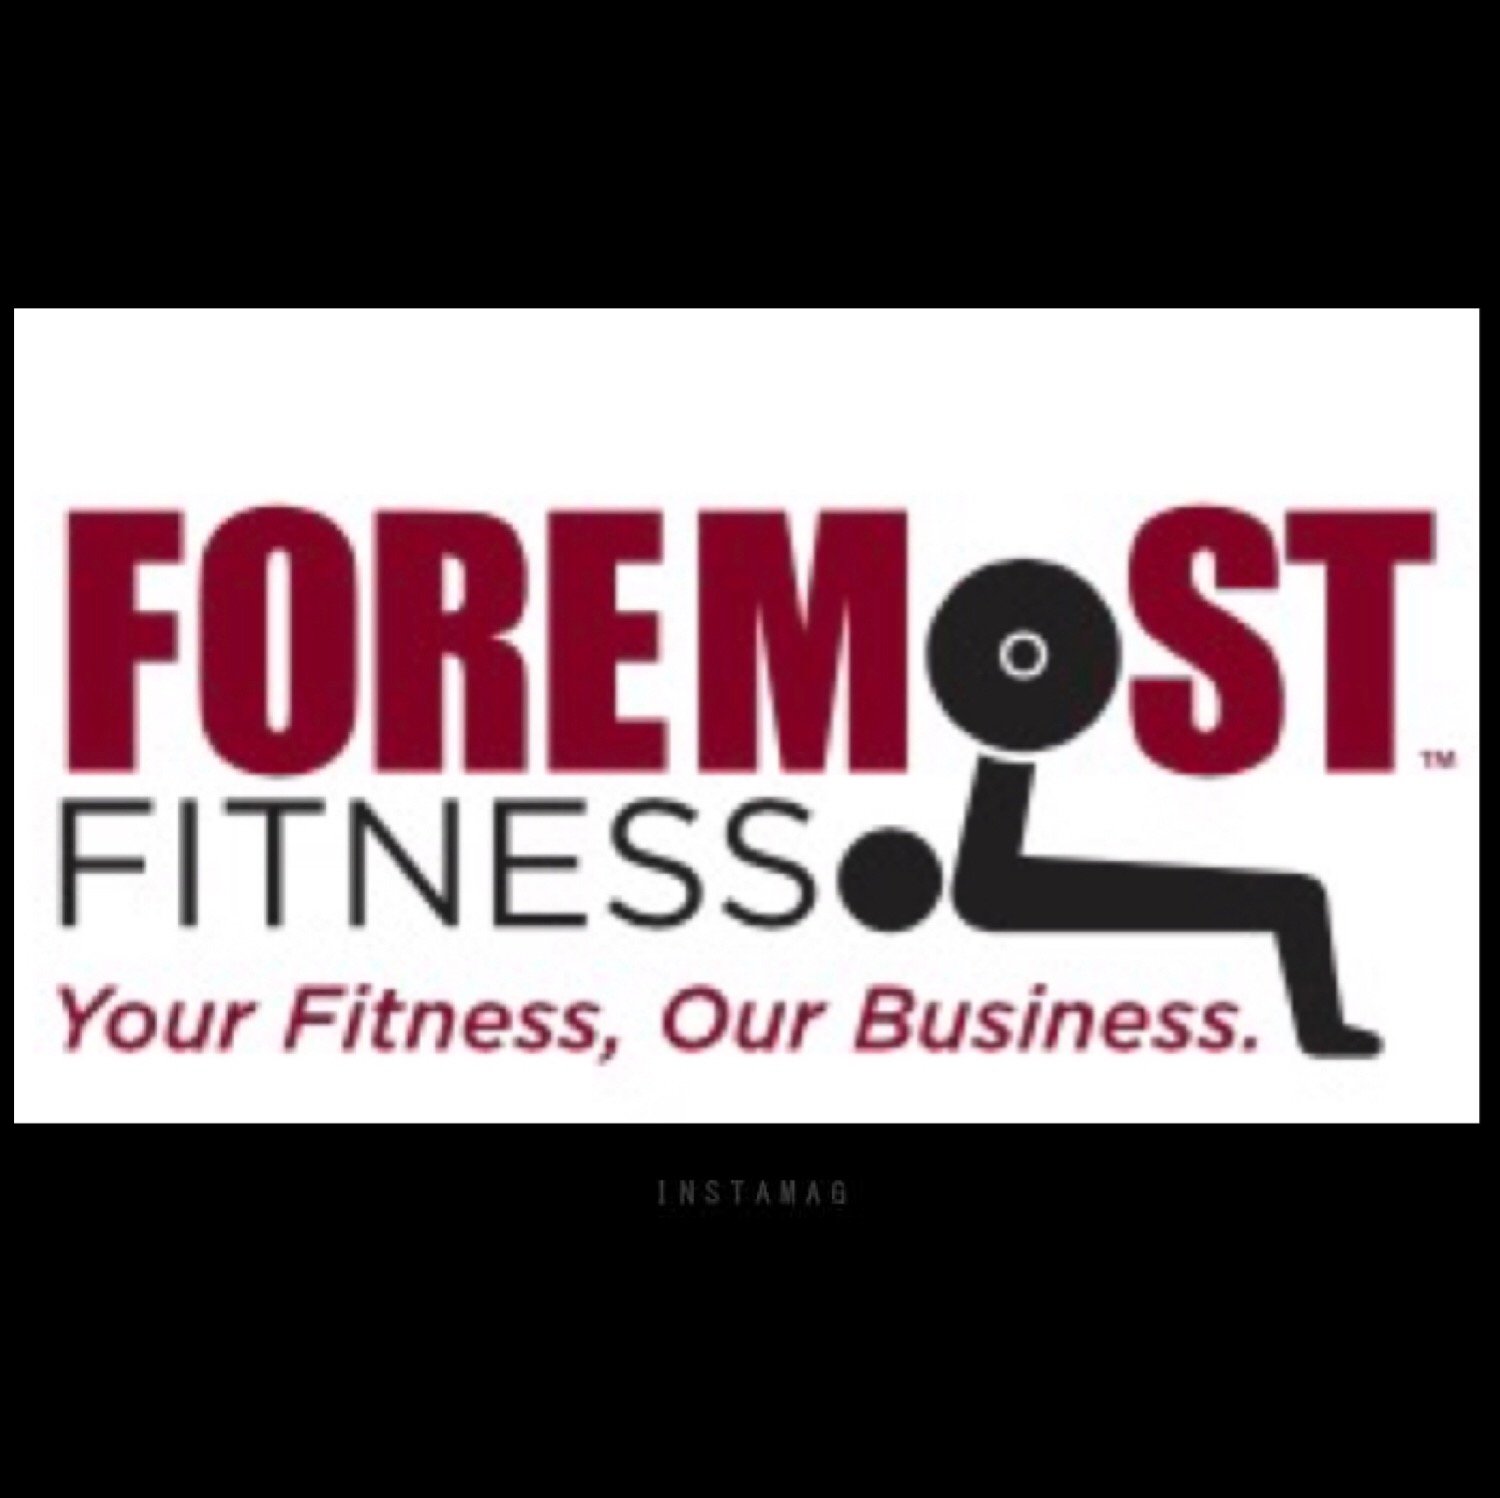 Commercial Fitness Equipment Supplier--high schools, colleges, multi-family, fire/police, corporate wellness centers, YMCAs/JCCs, community rec centers & more!